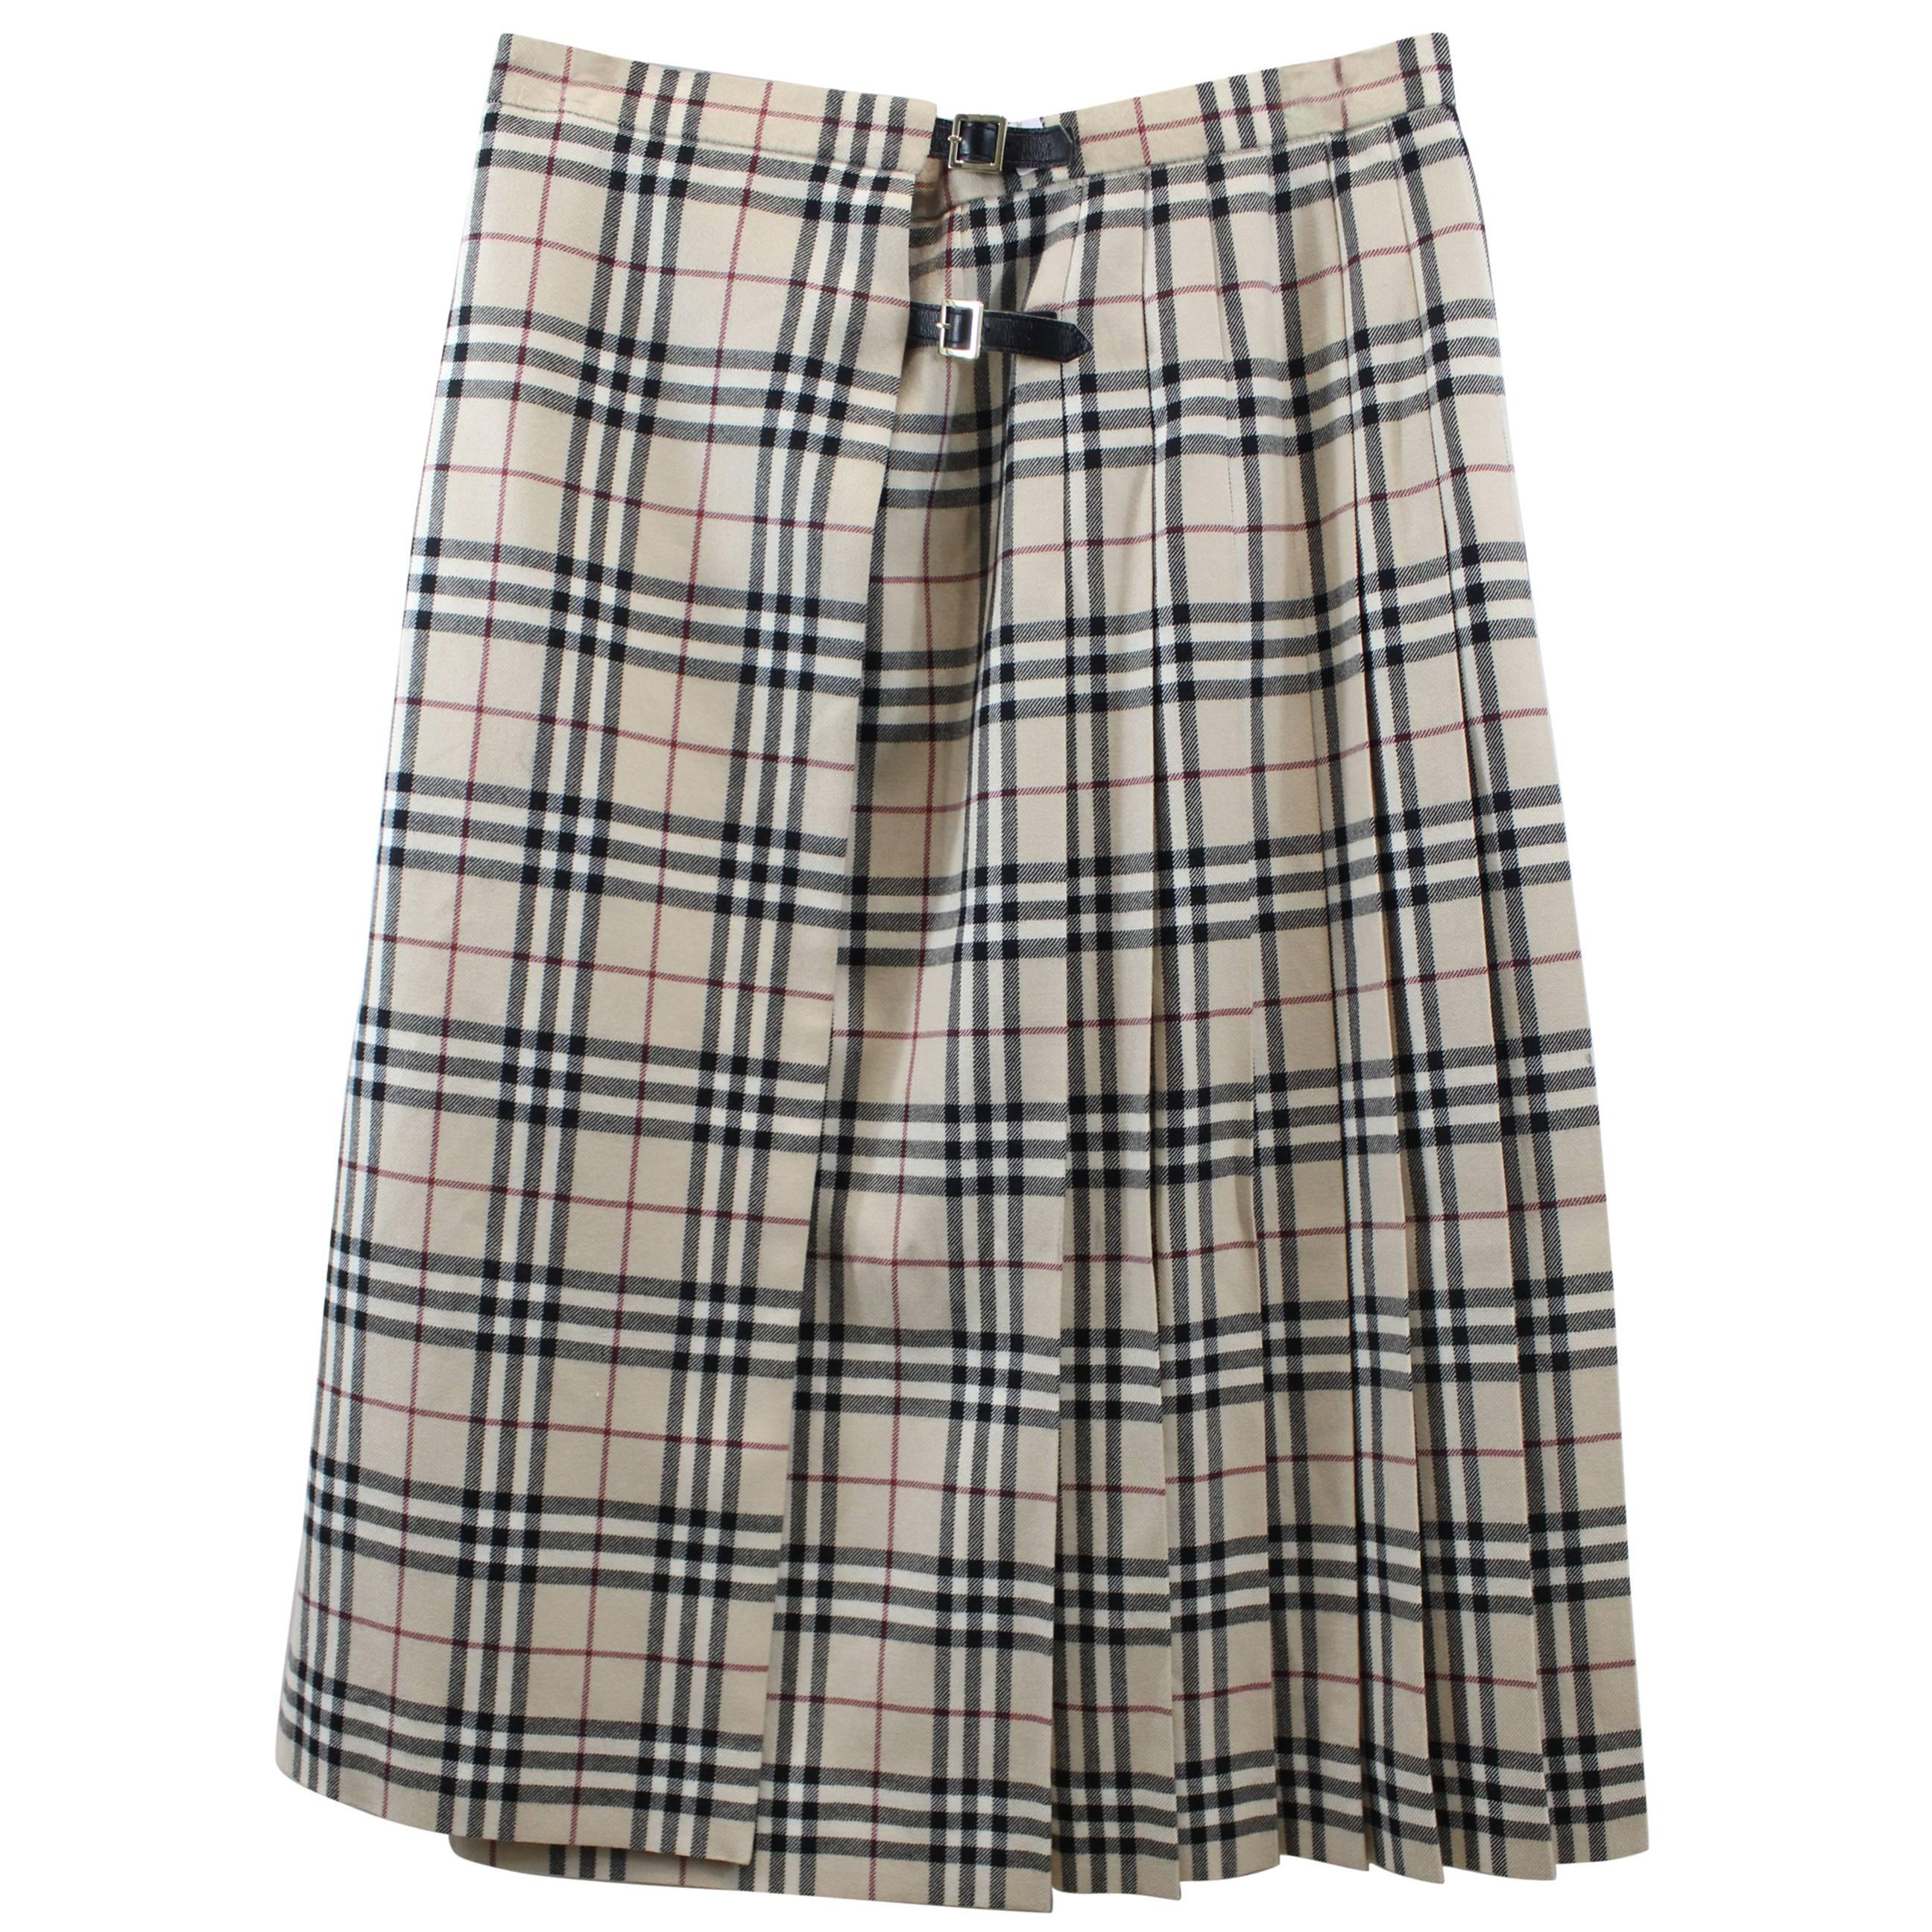 Burberry Wool Skirt with Check Pattern. Size 13